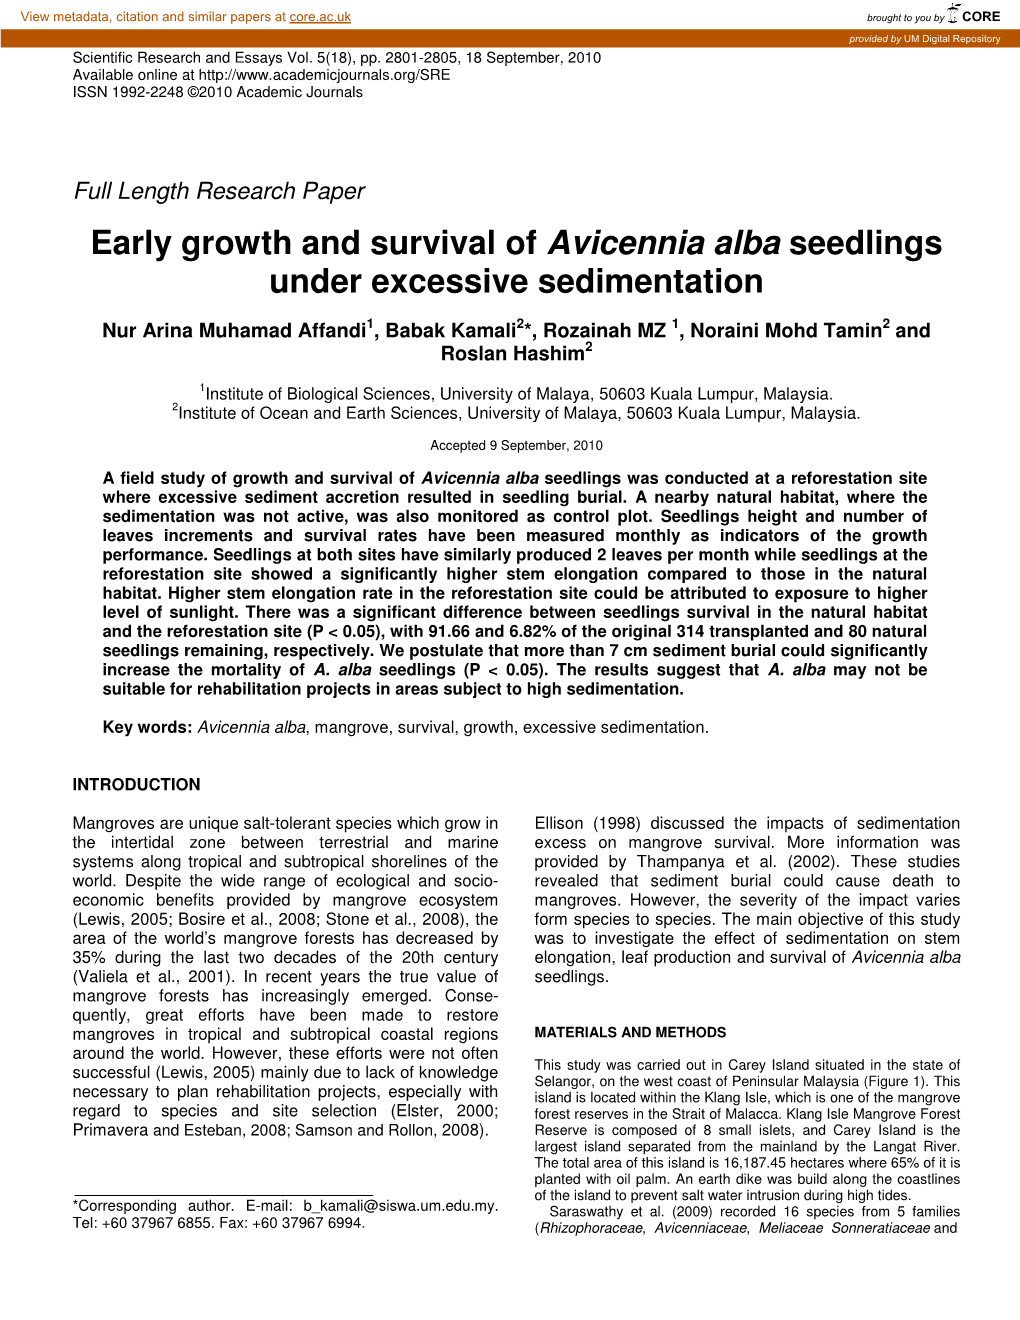 Early Growth and Survival of Avicennia Alba Seedlings Under Excessive Sedimentation